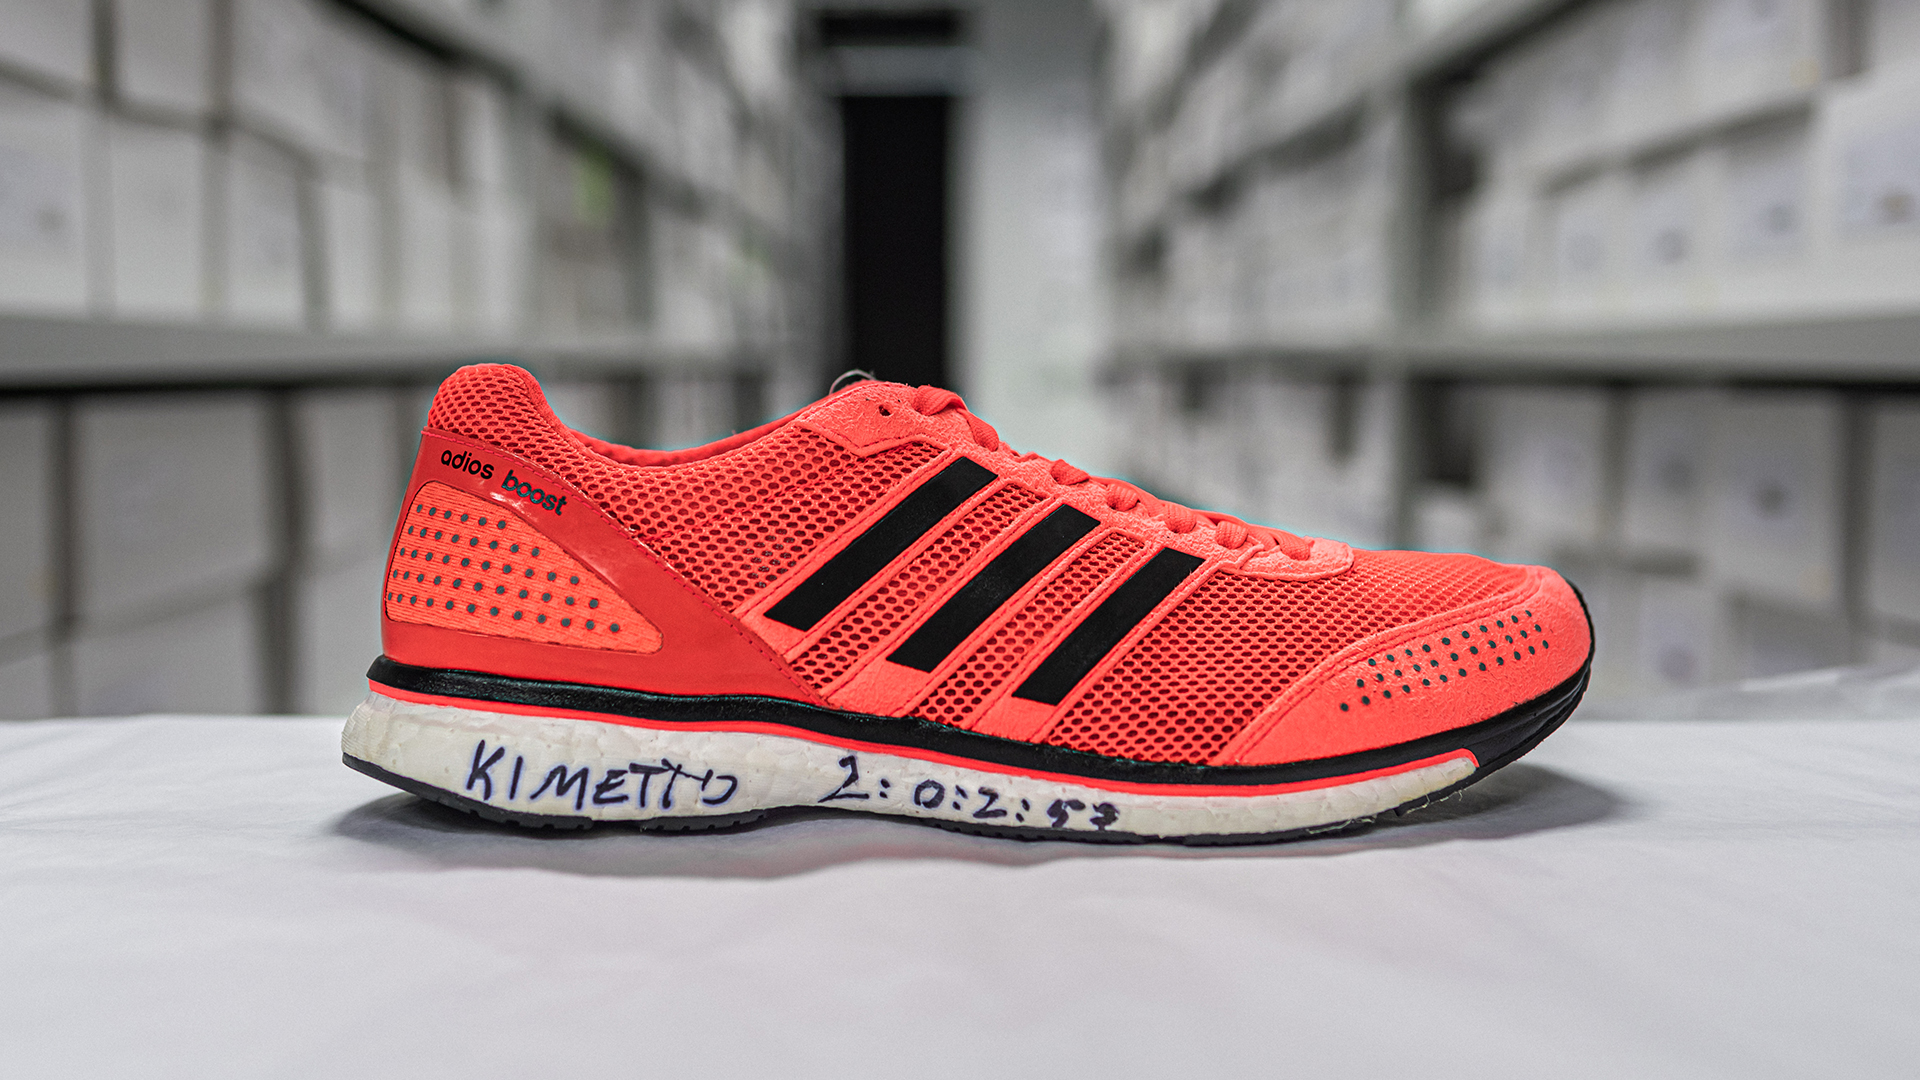 adidas Running on Twitter: "With the adizero adios 2.0 on his feet, Dennis Kimetto changed fast forever the 2014 Berlin Marathon. Crossing the finish line in a world record